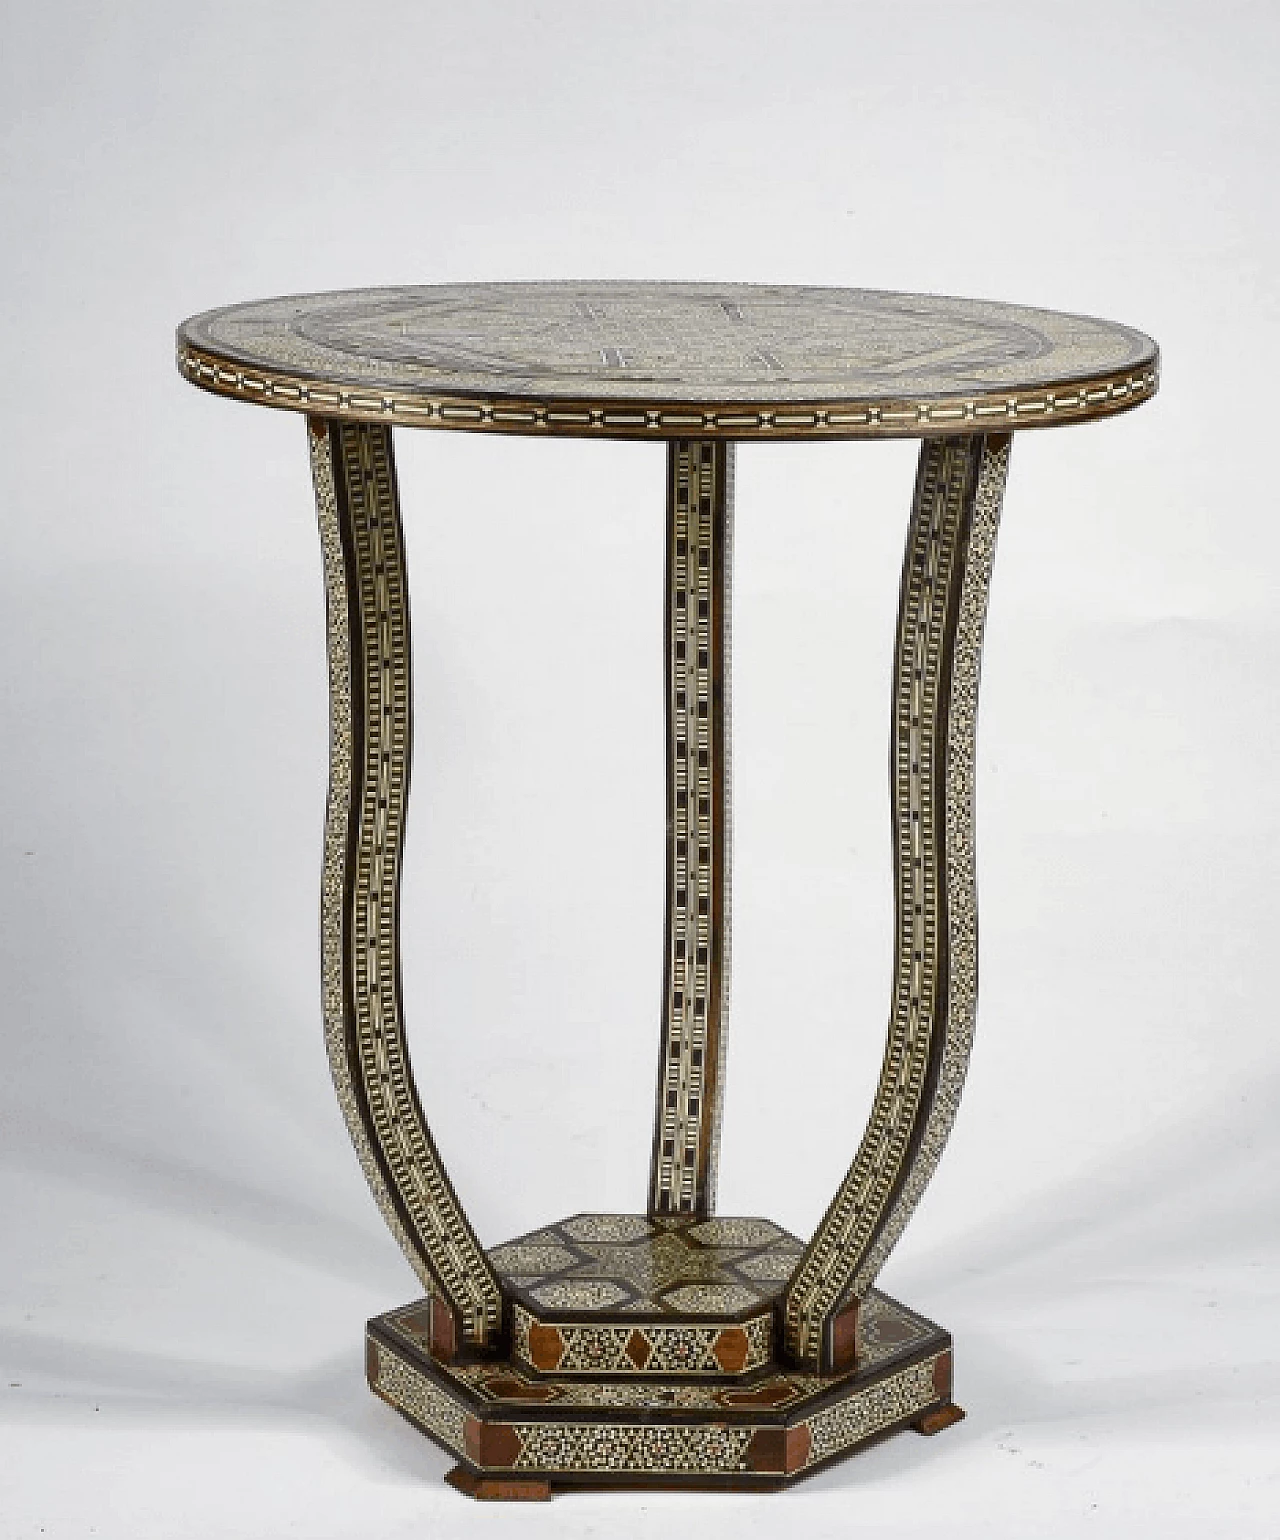 Small wooden table inlaid with mother-of-pearl in Bugattian style, mid-20th century 1